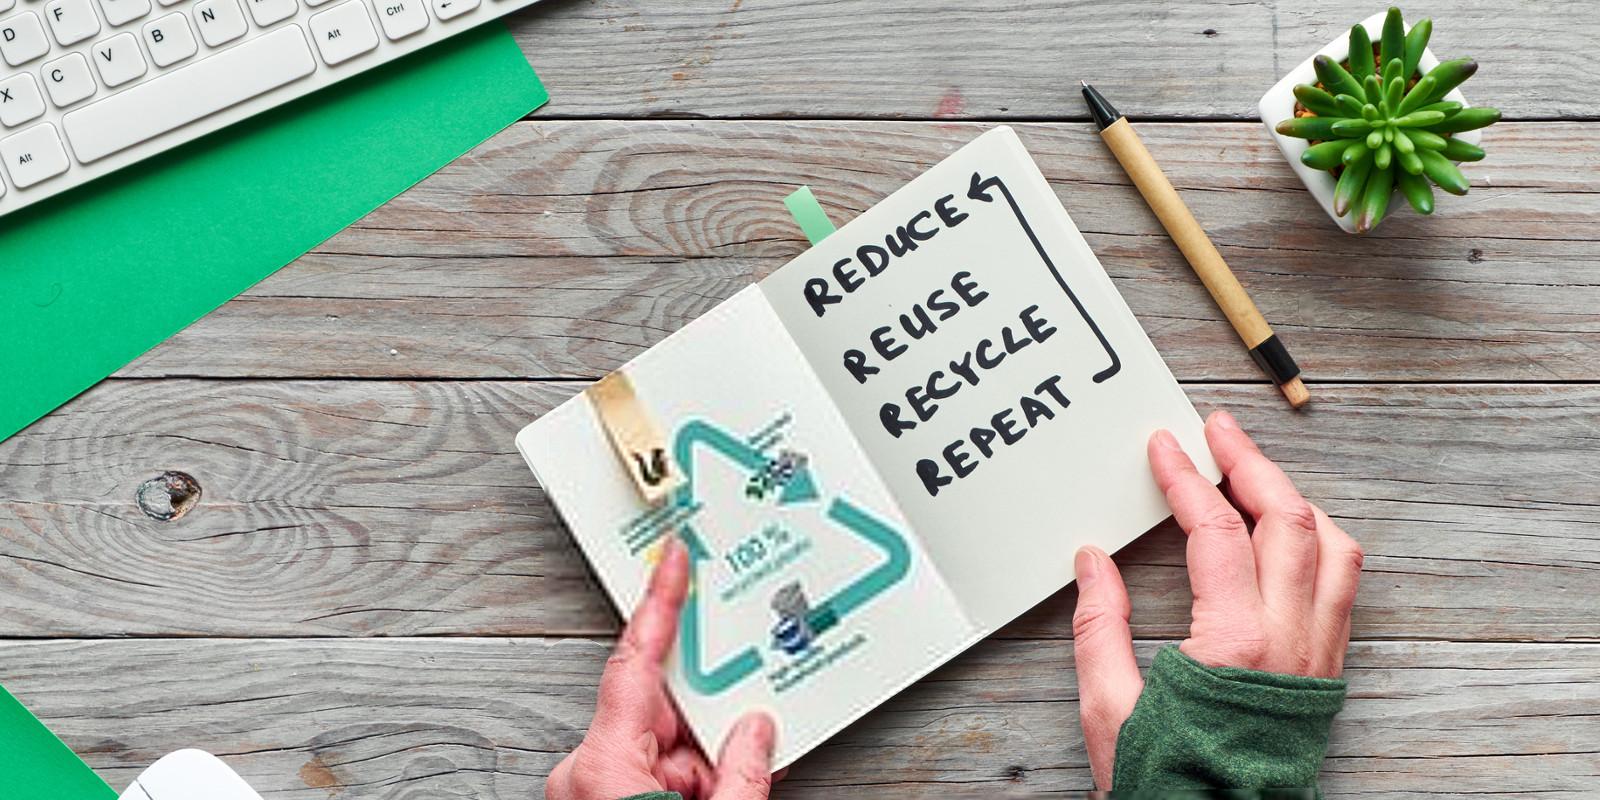 Reduce Waste, reuse, rececycle, repeat